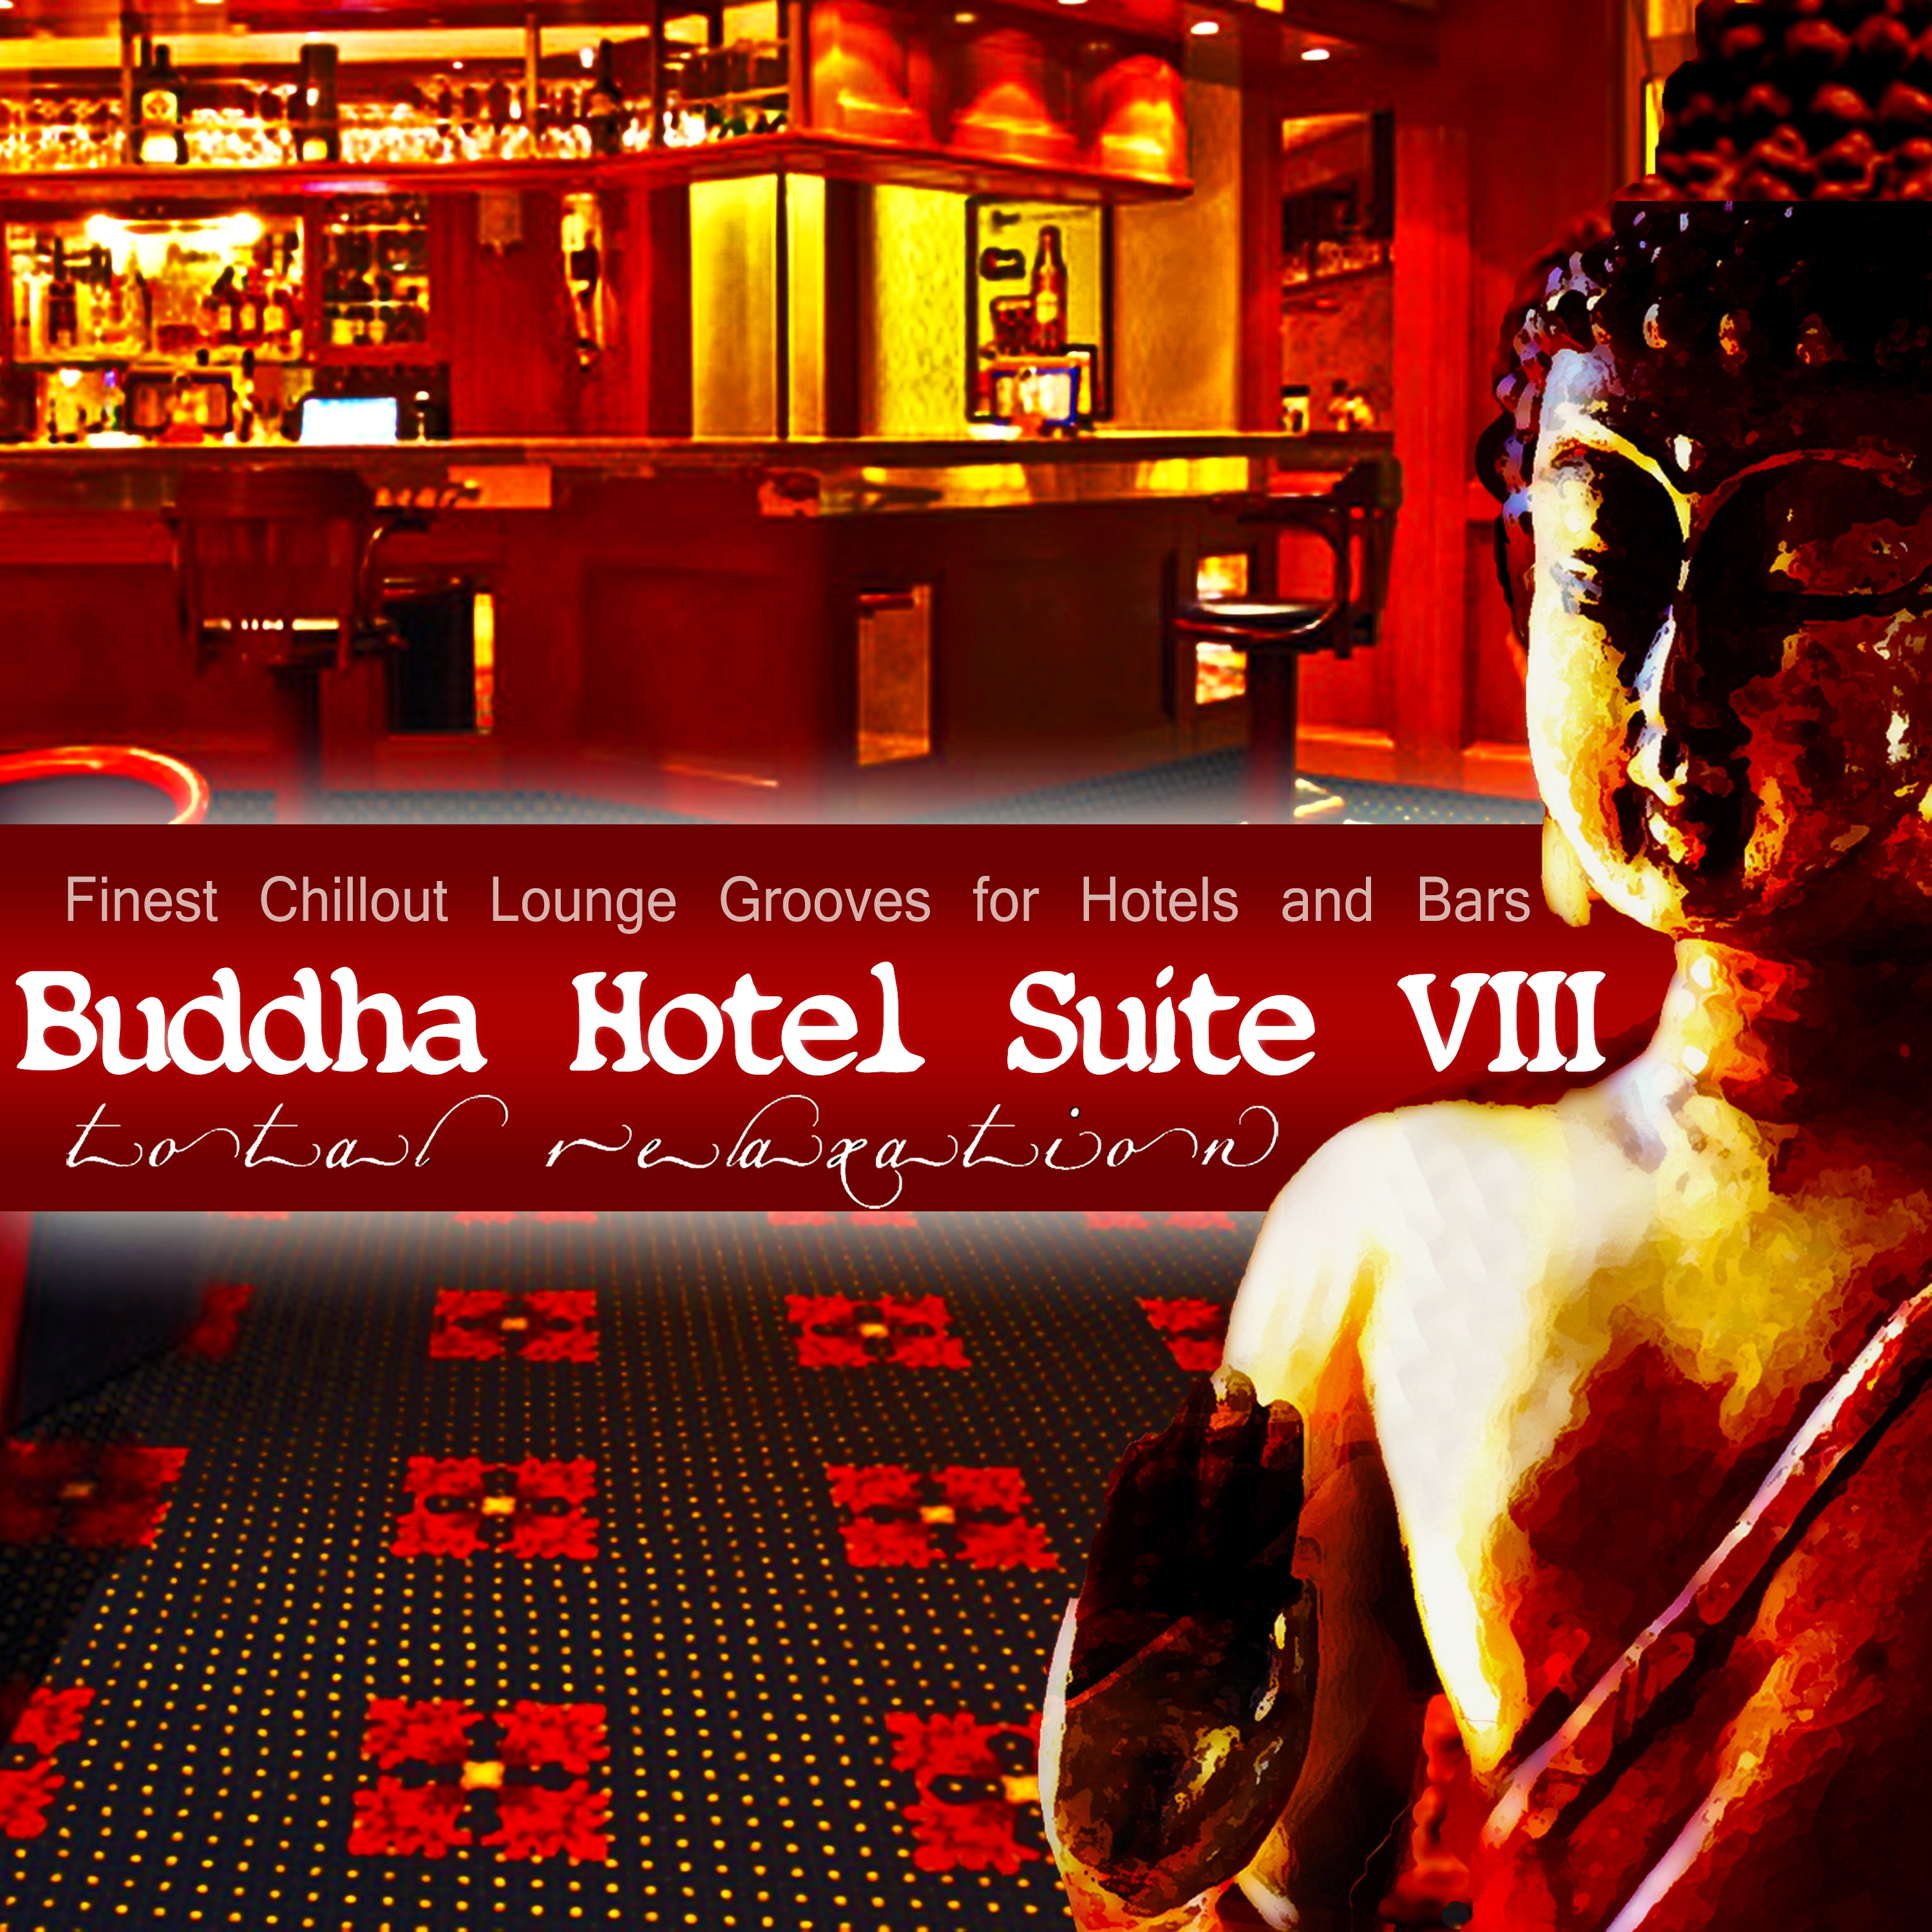 Buddha Hotel Suite, Vol. 8 - Finest Chillout Lounge Grooves for Hotels and Bars (Mixed By Mazelo Nostra) [Continuous DJ Mix]